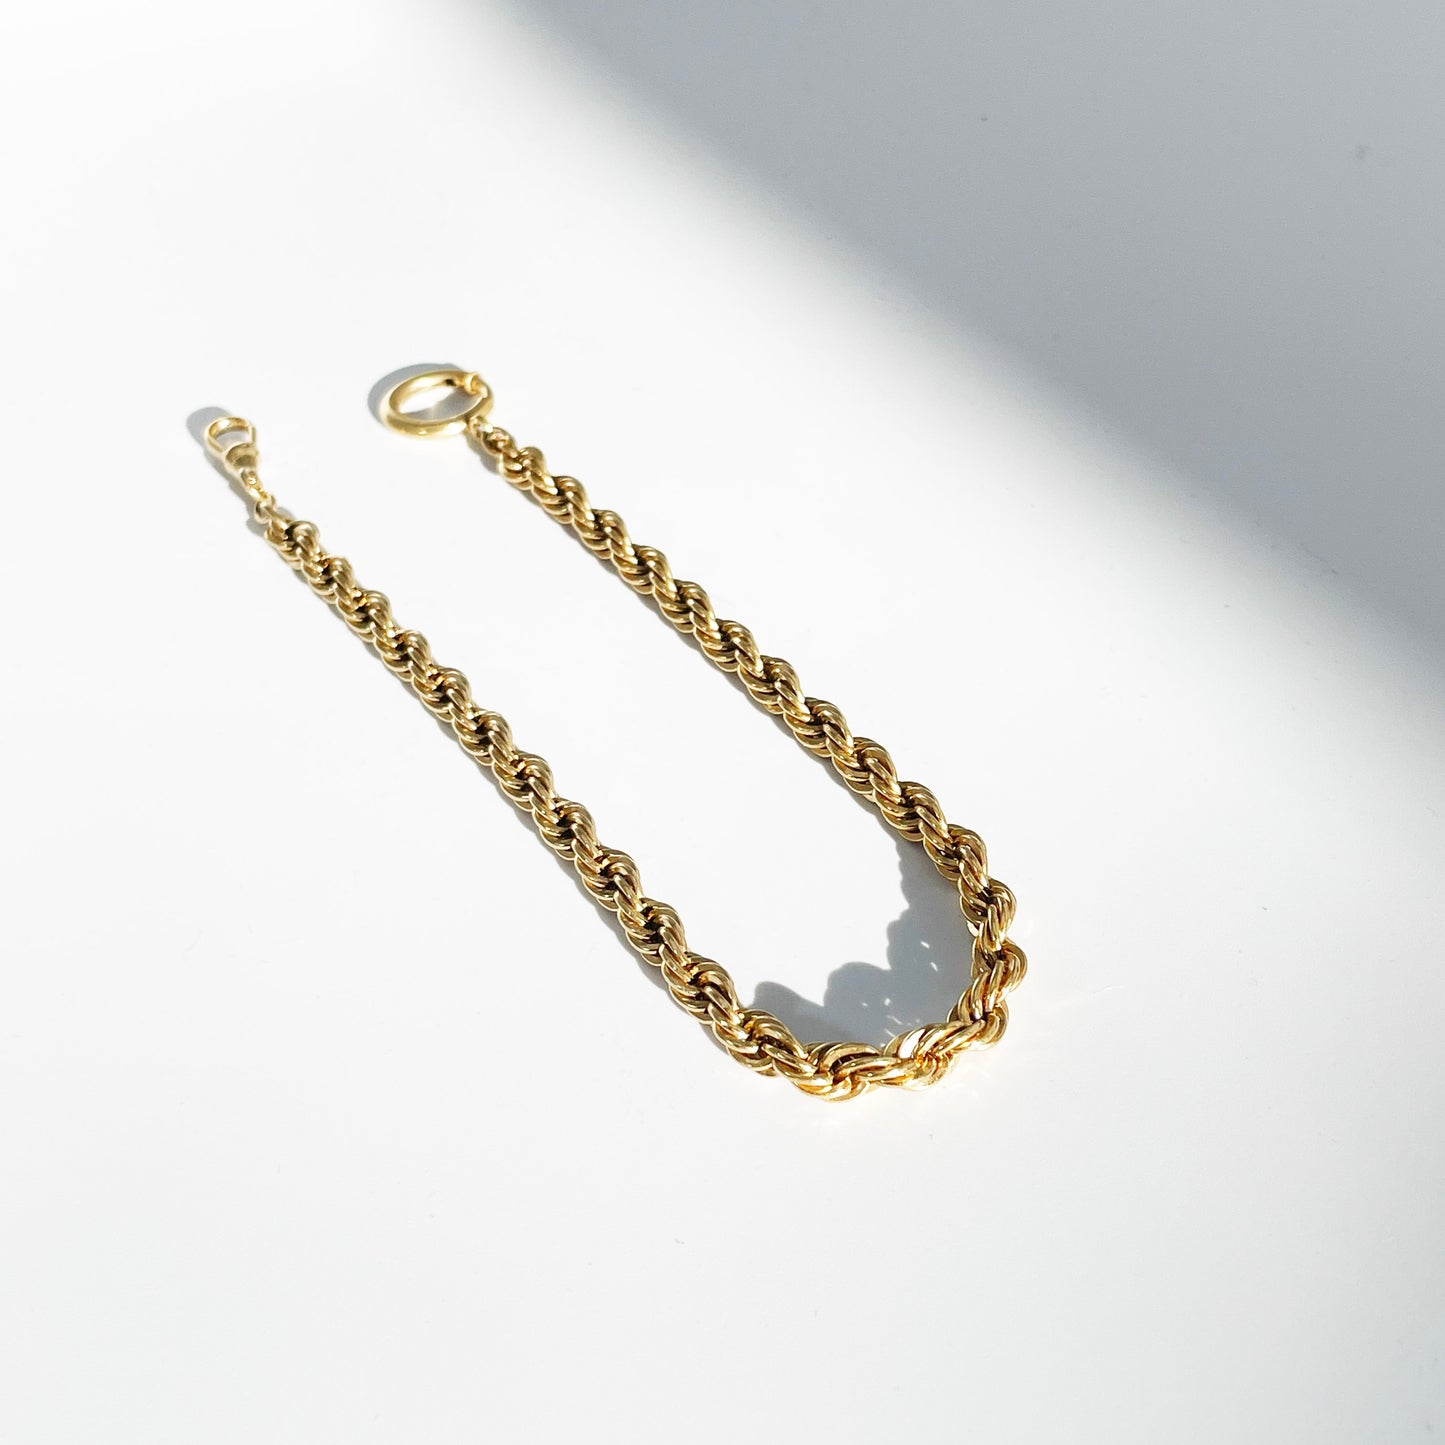 Antique Watch Chain | 12ct Gold Filled